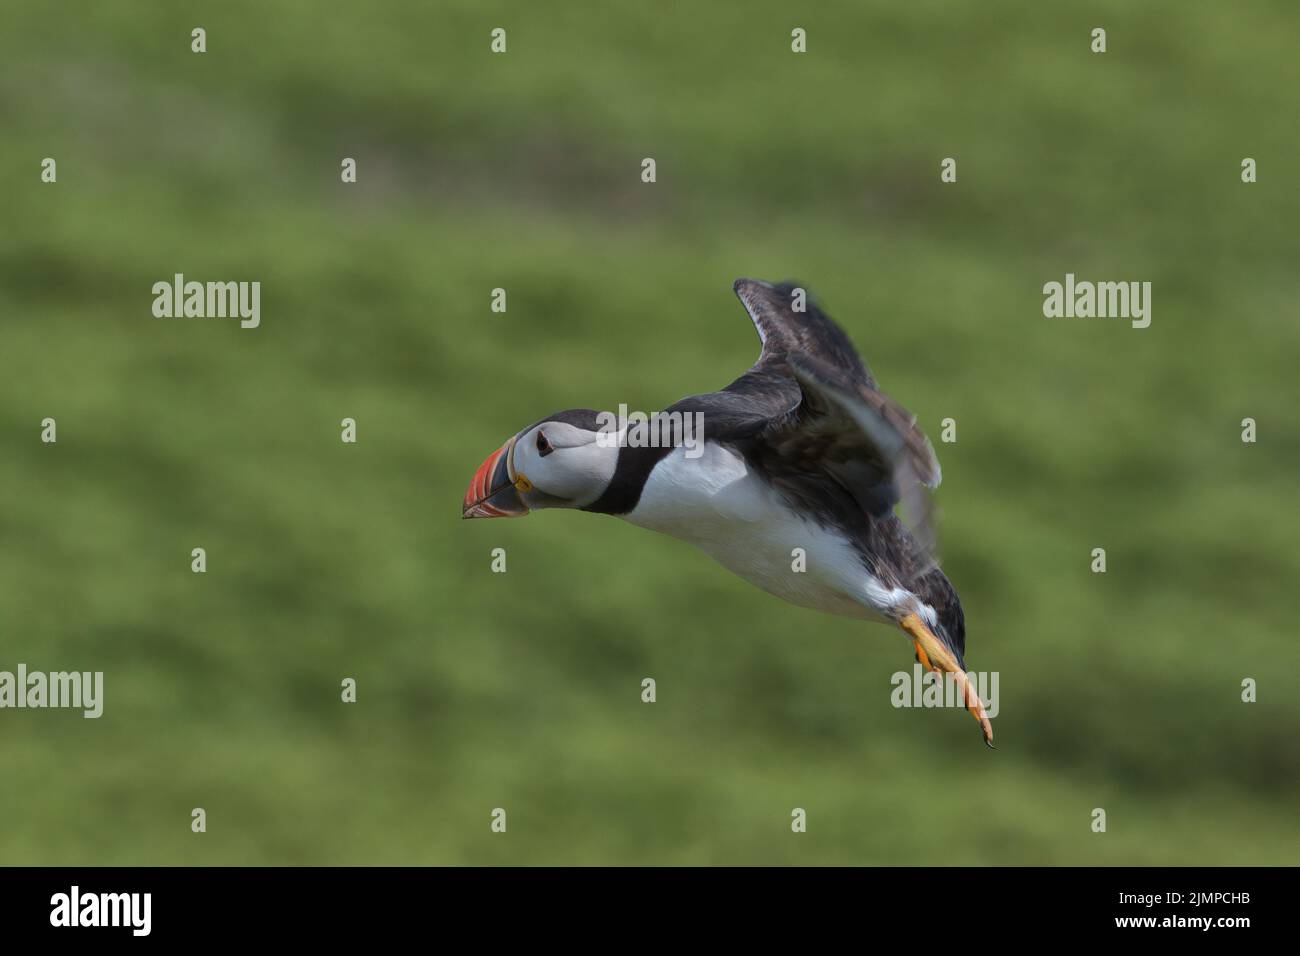 Atlantic Puffin in flight with a green background on Skomer island. Stock Photo